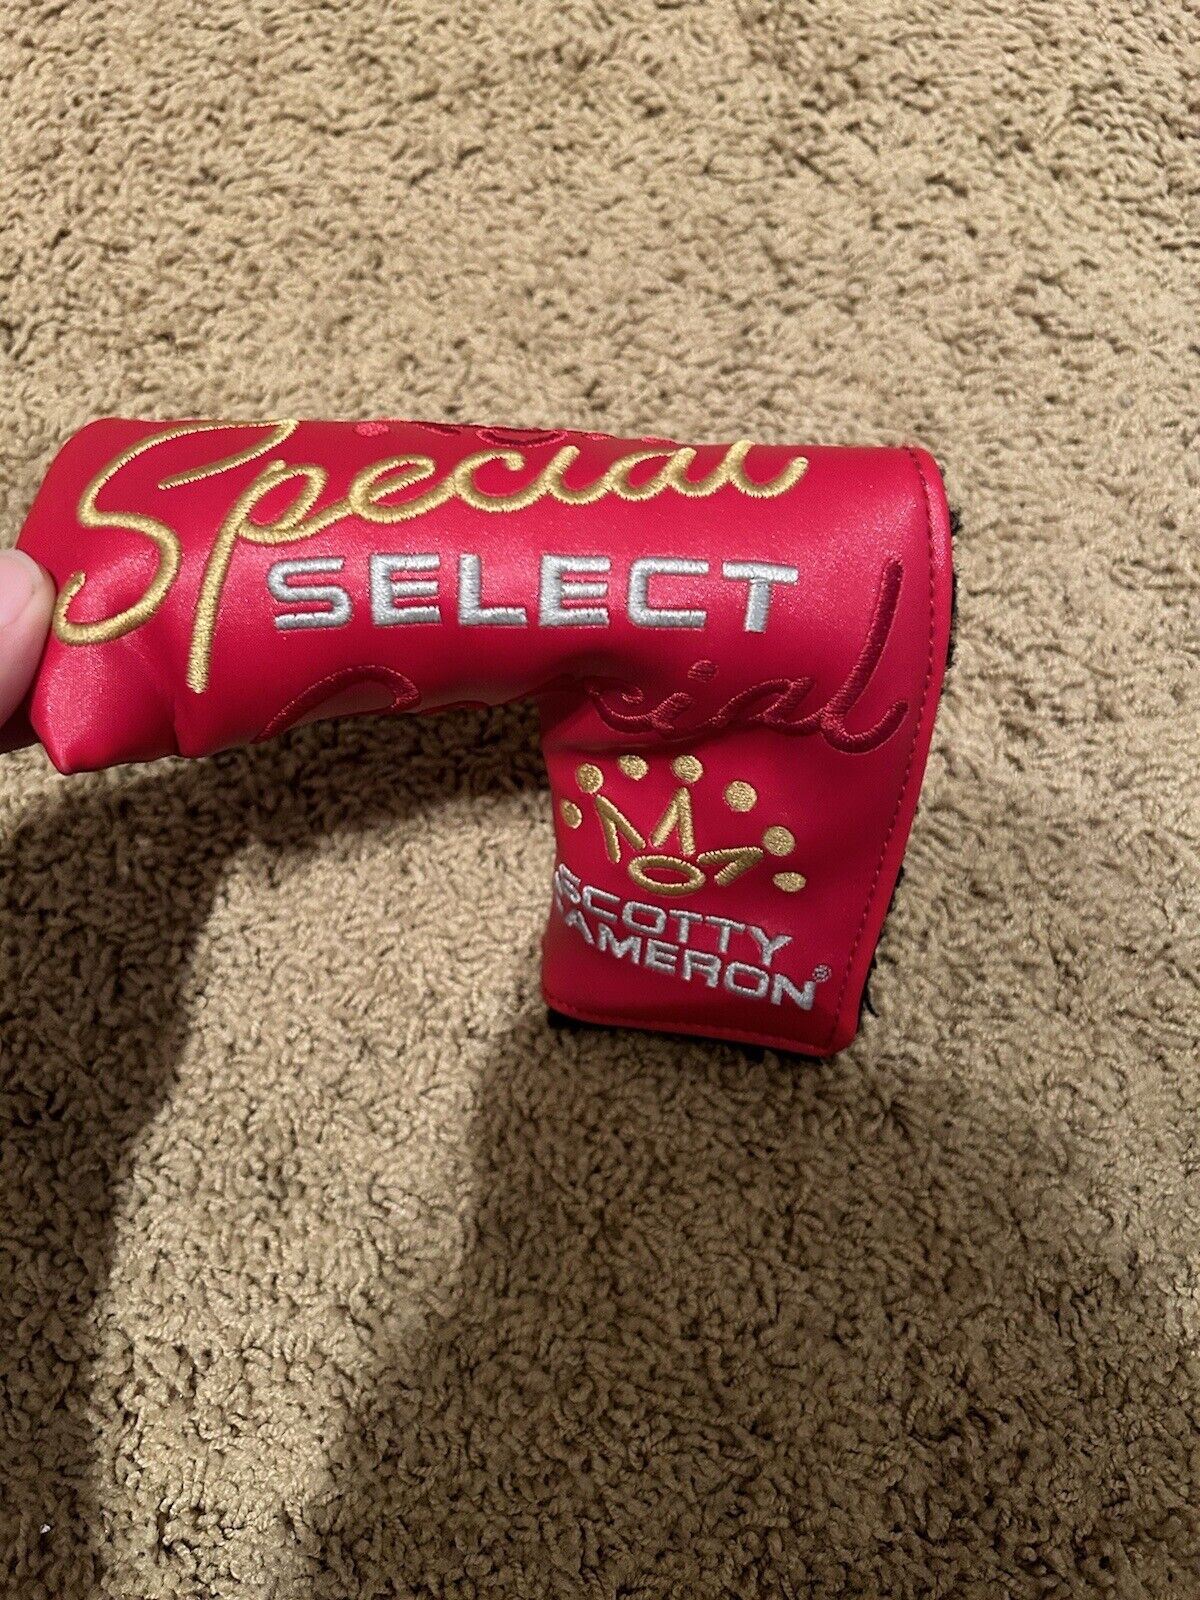 SCOTTY CAMERON SPECIAL SELECT PUTTER HEADCOVER for Newport 2, 2.5 & Fastback